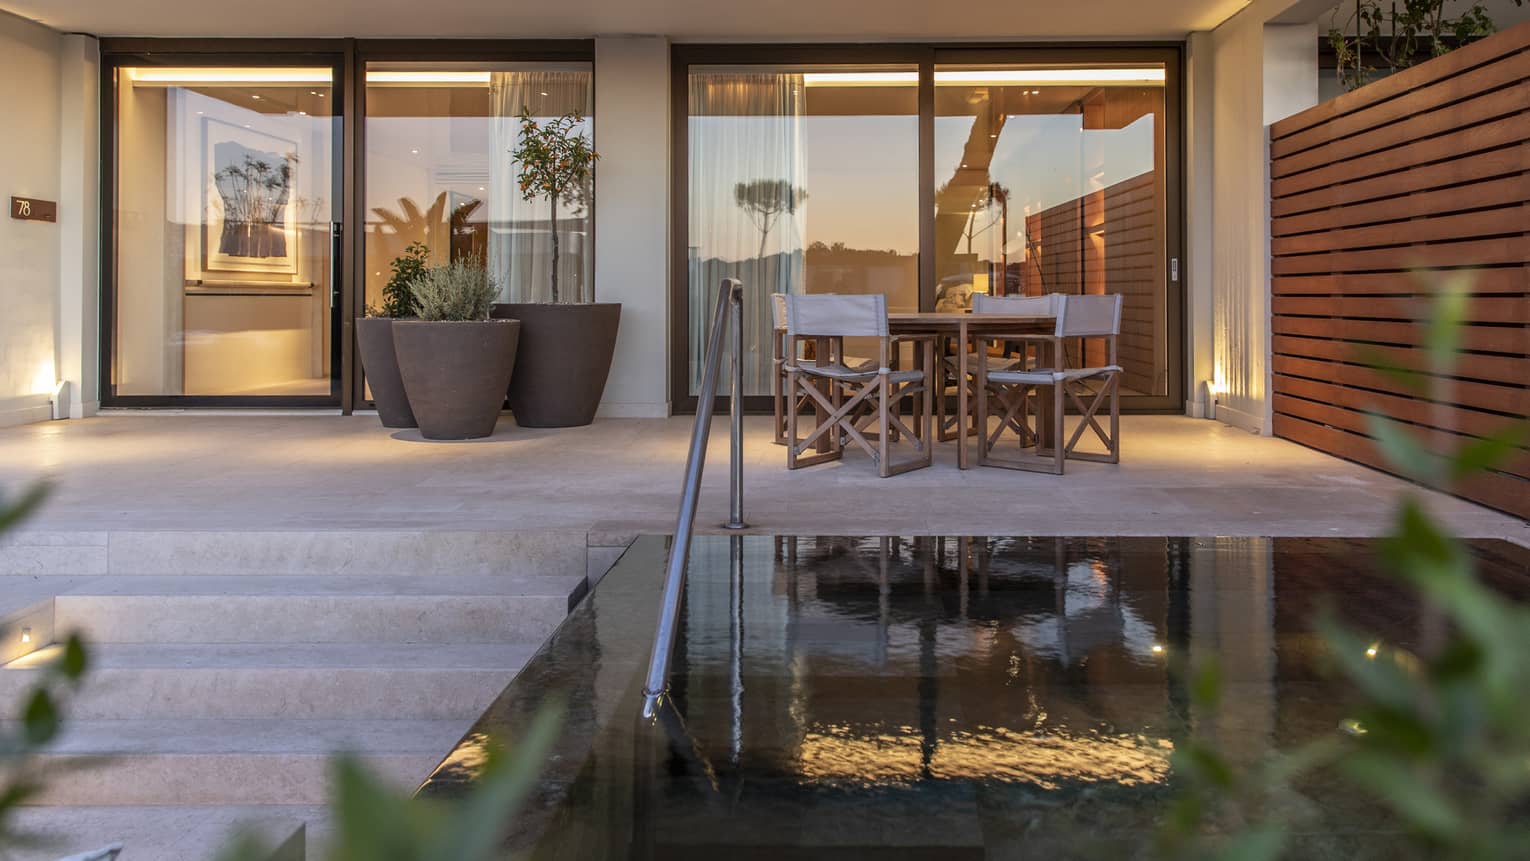 Private terrace at dusk with plunge pool, dining table for four, wooden privacy wall